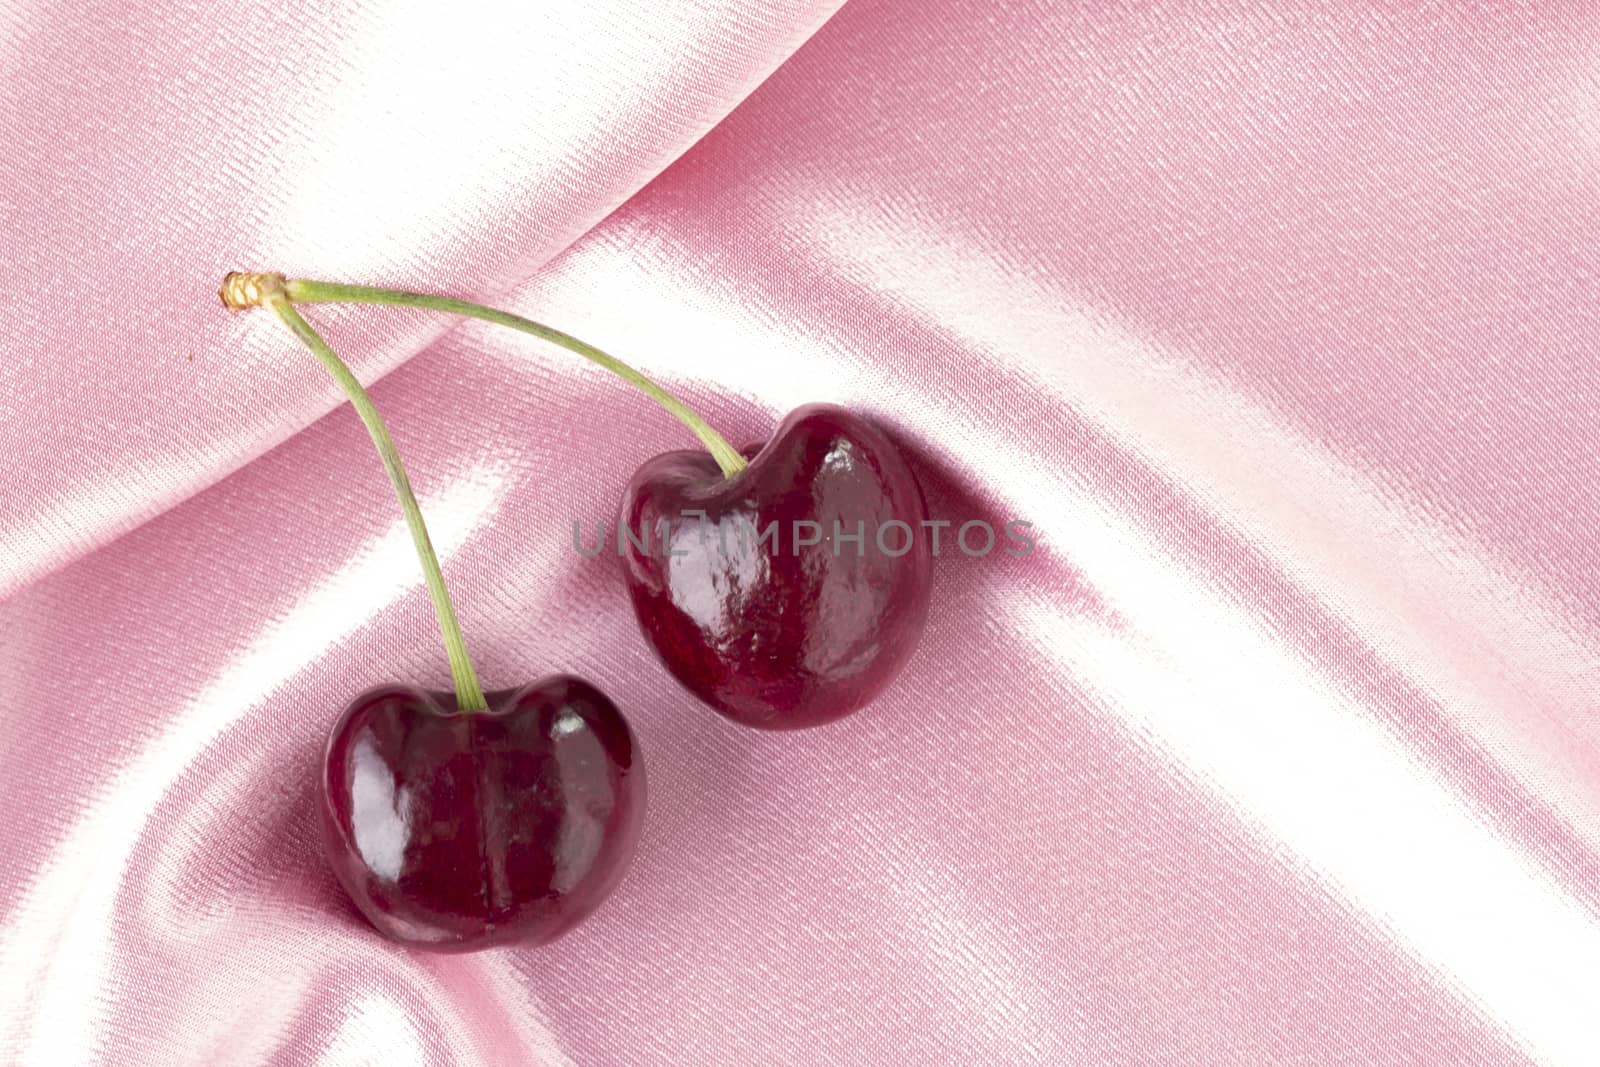 Two fresh cherries on pink satin cloth background